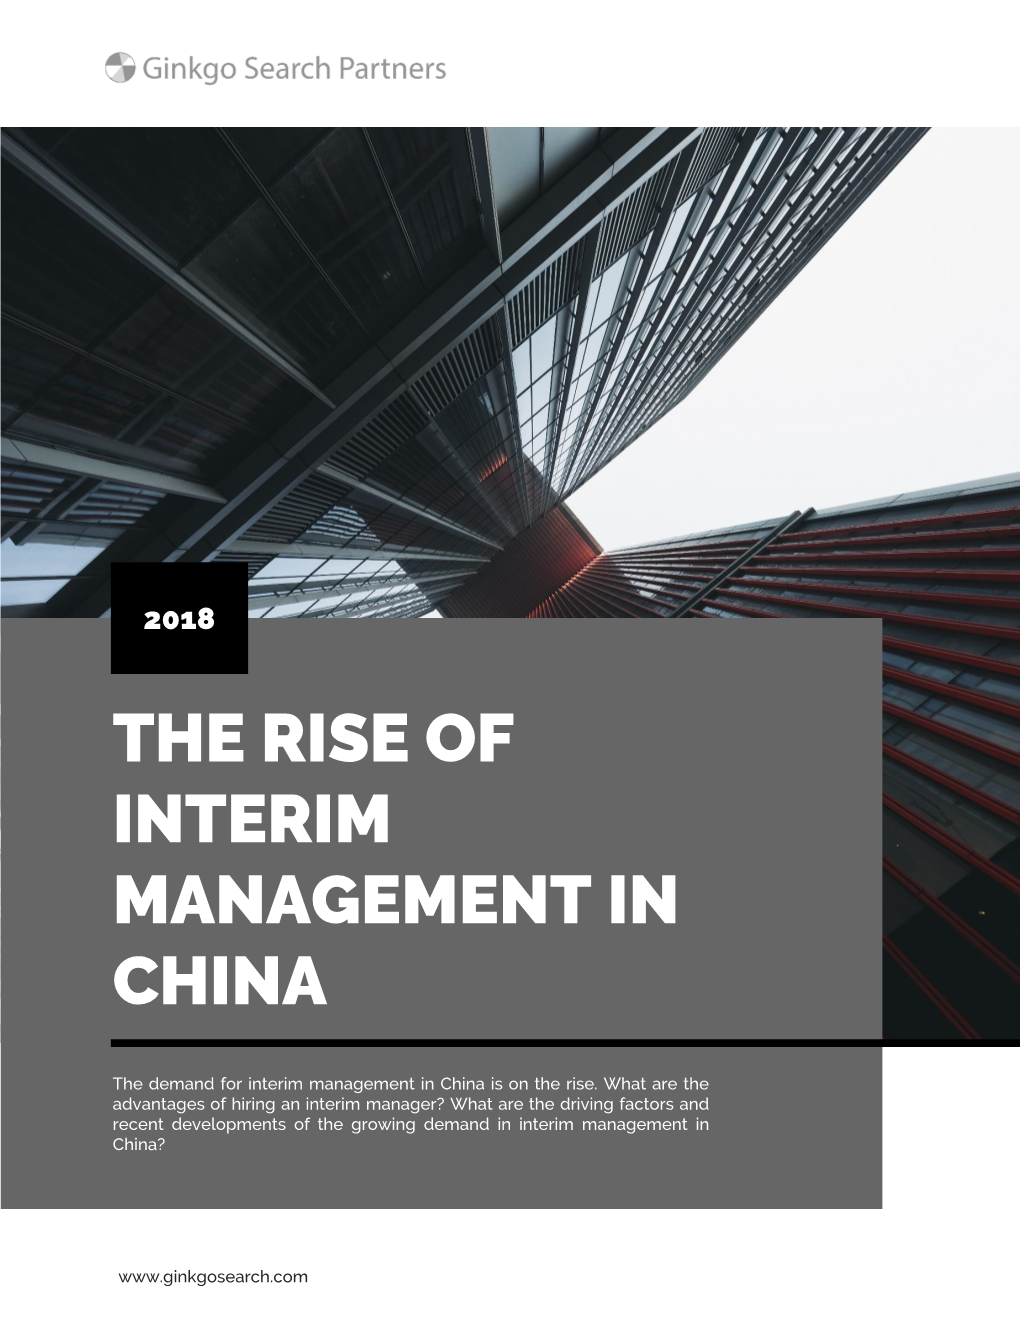 The Rise of Interim Management in China